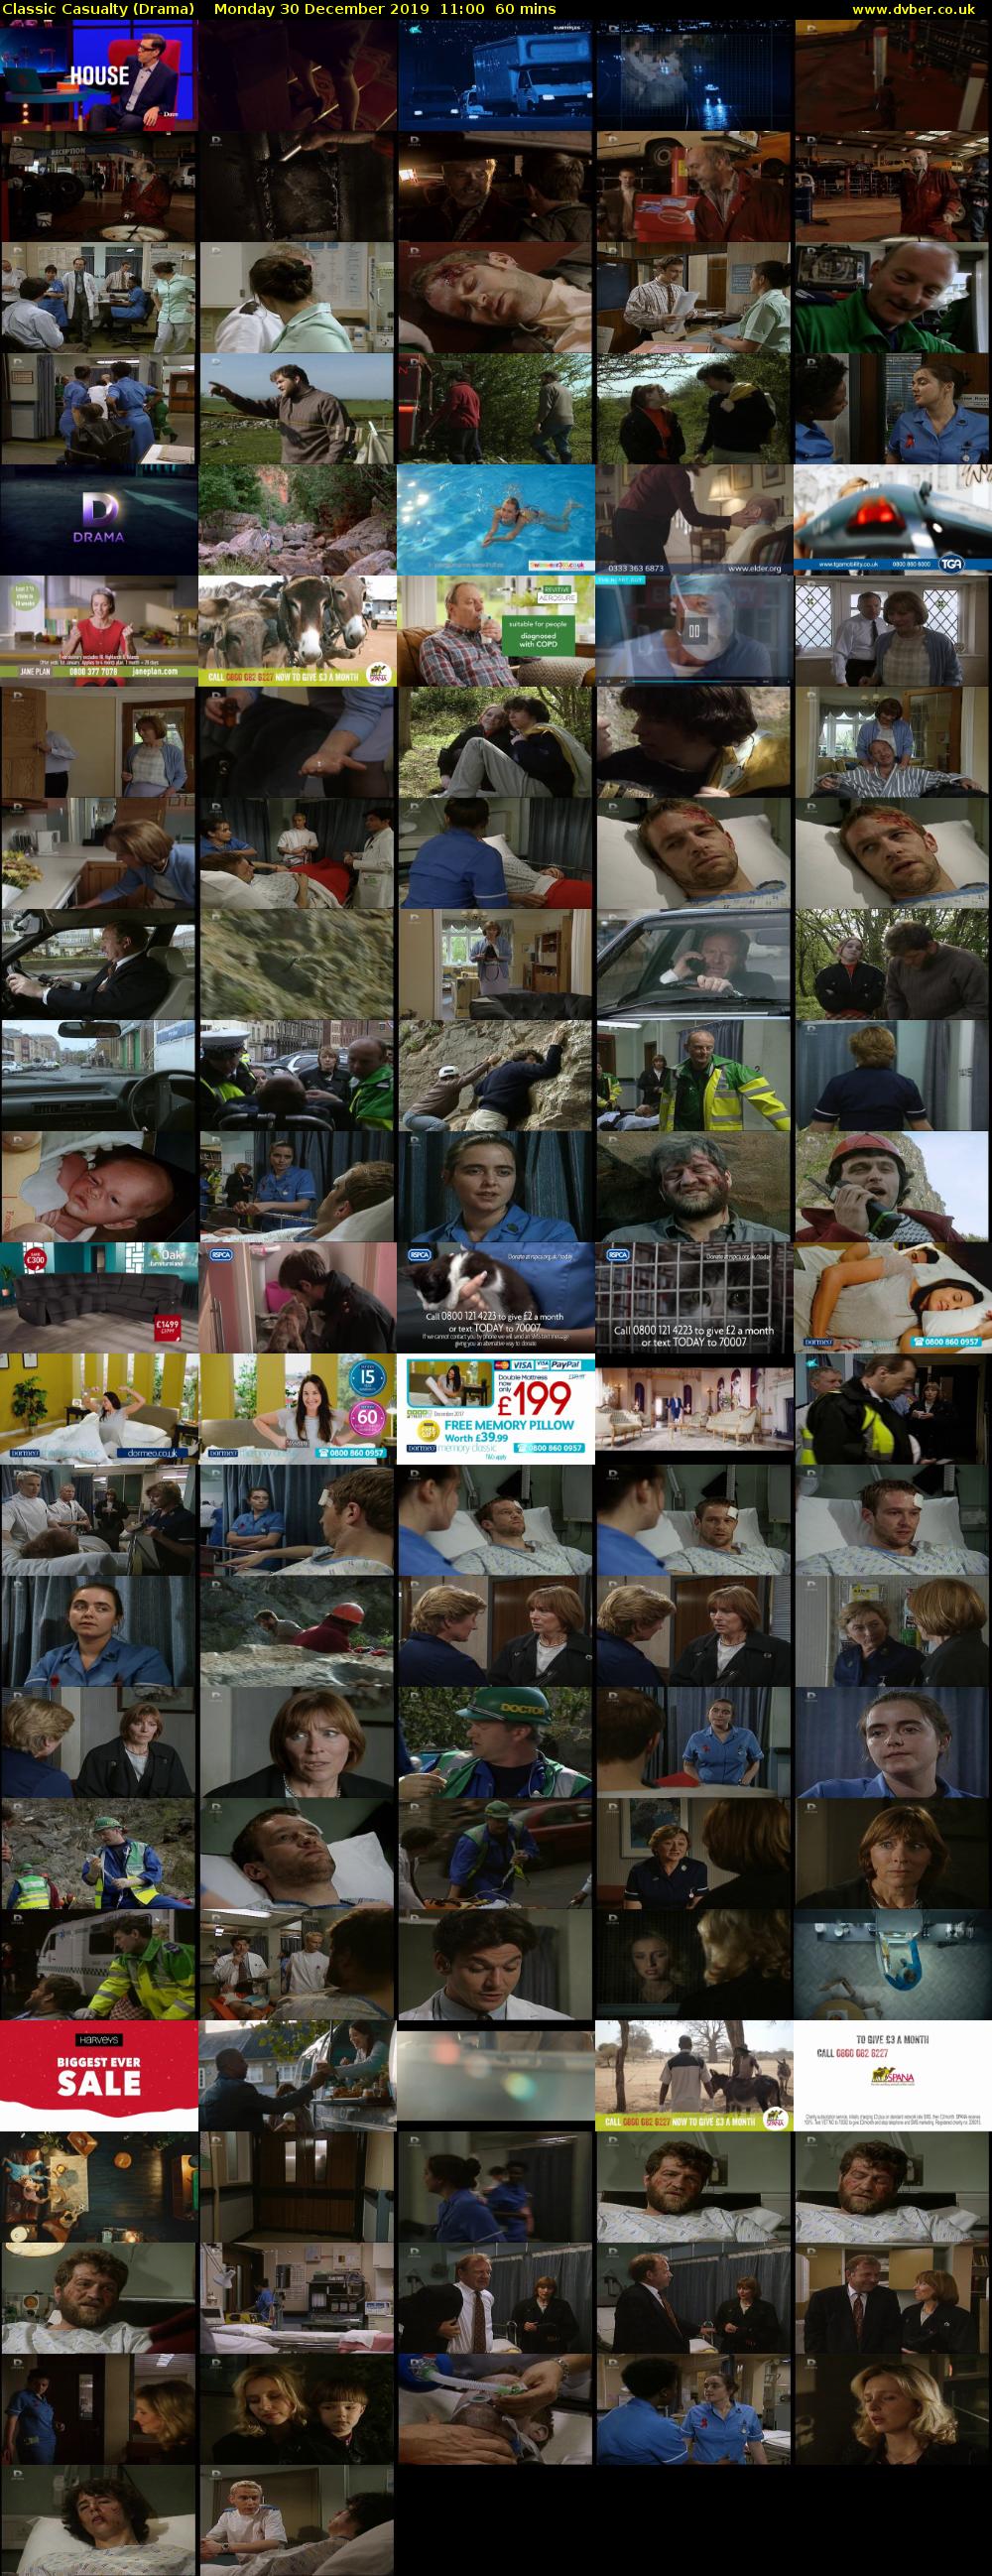 Classic Casualty (Drama) Monday 30 December 2019 11:00 - 12:00